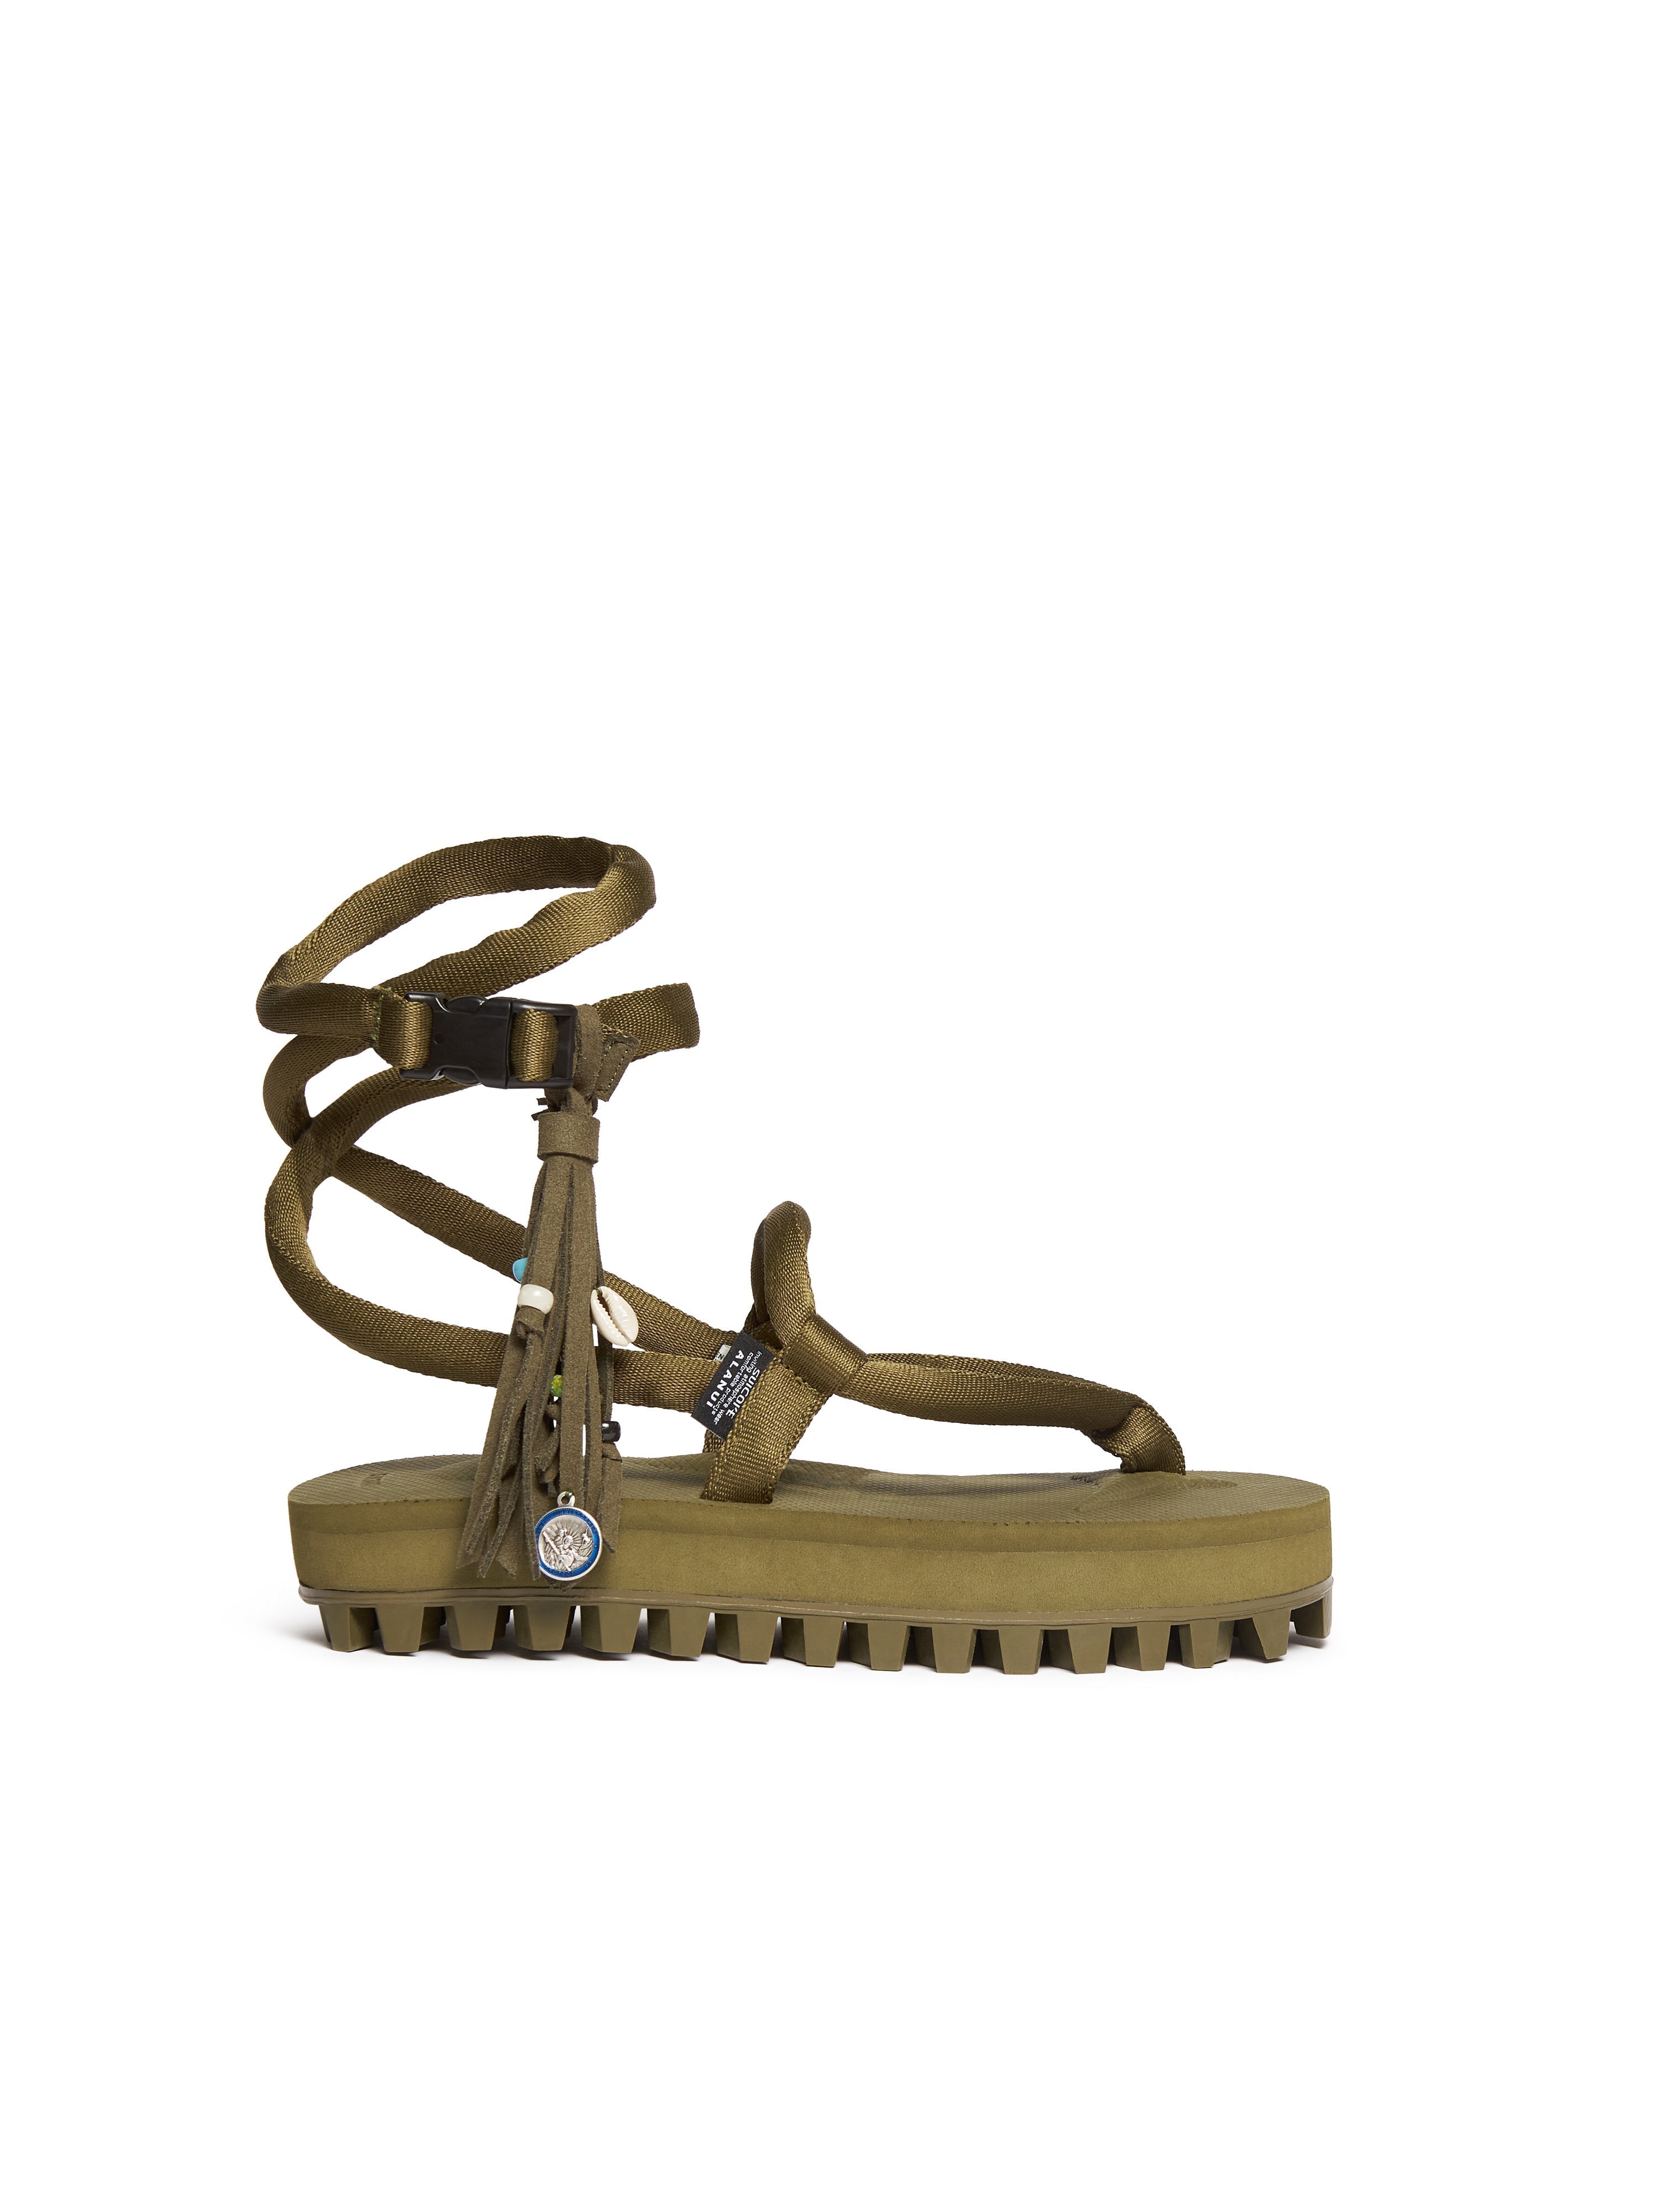 SUICOKE Alanui Edition GUT-HI-ab sandals with Cushioned Nylon Straps w/ Suede Fringe Accents , olive midsole and sole. From Spring/Summer 2022 collection on SUICOKE Official US &amp; Canada Webstore.